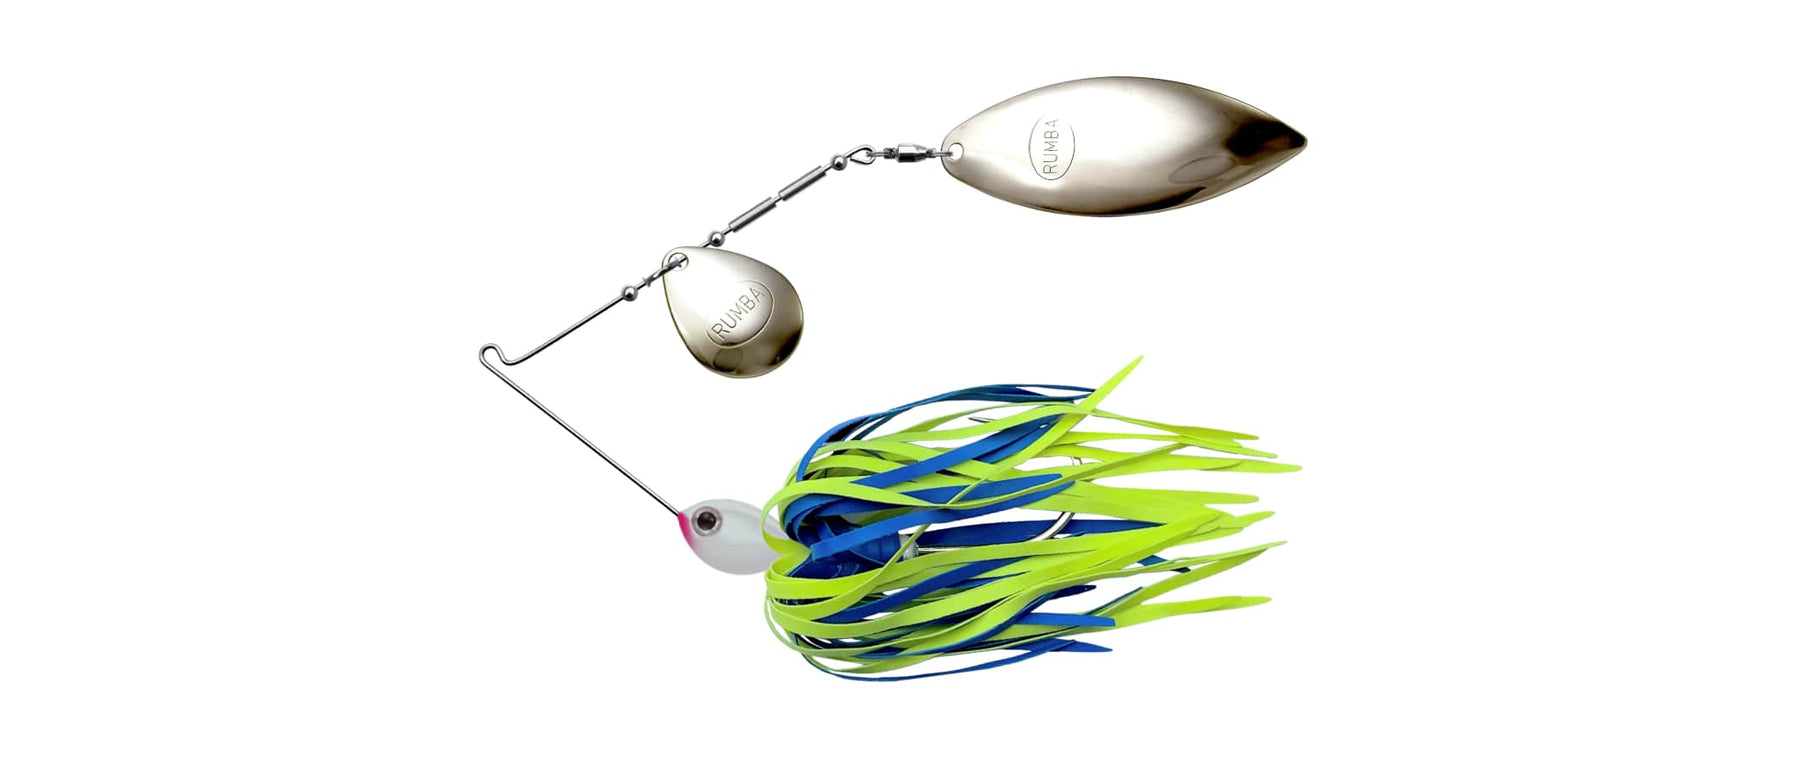 How to Use a Spinnerbait Fishing Lure